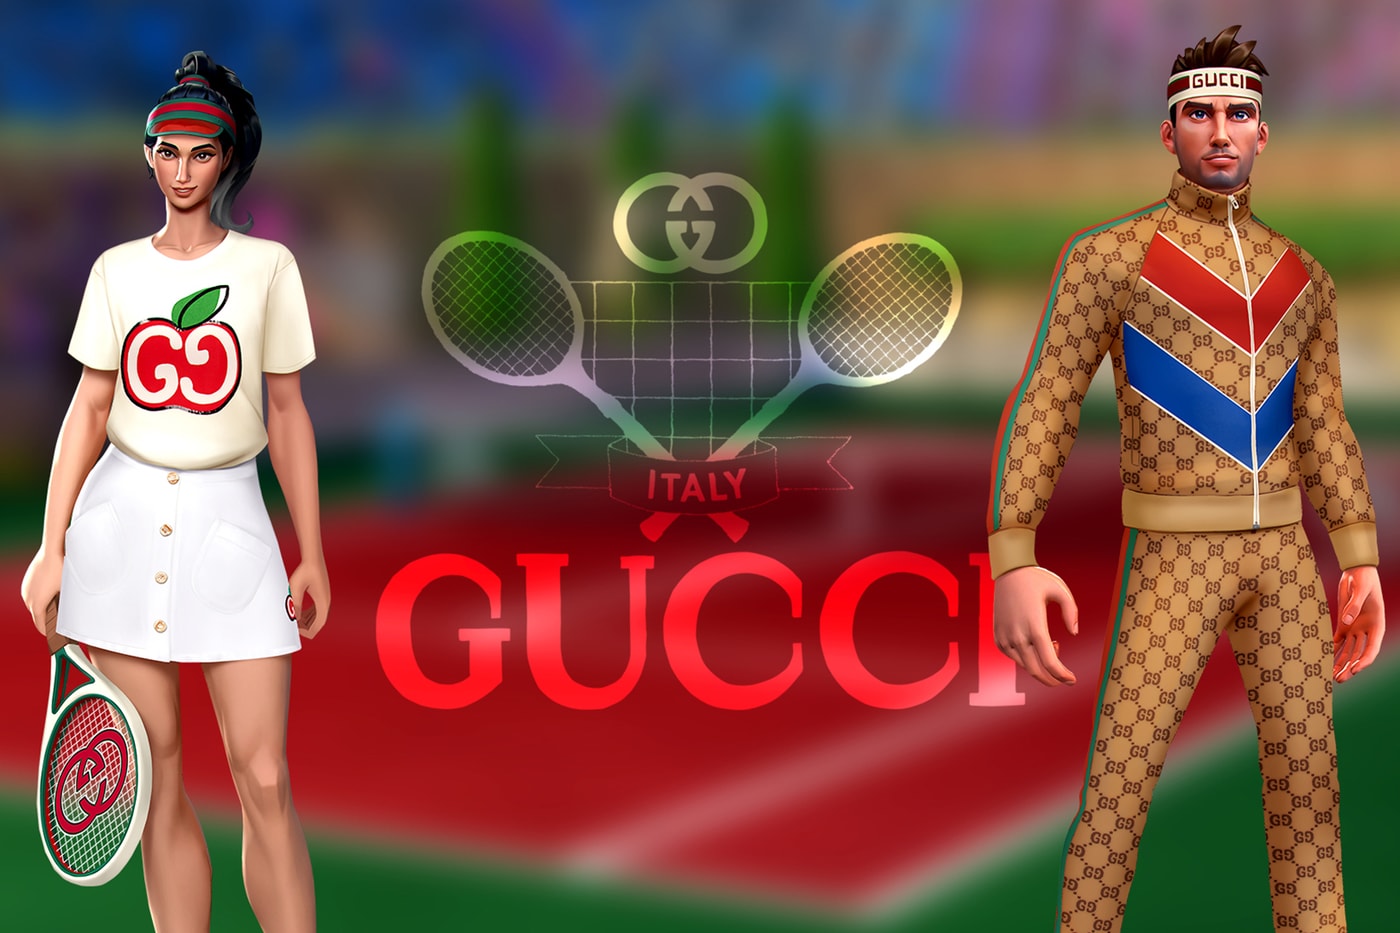 Gucci Tennis Clash Sports Video Game Outfits T-Shirt Tracksuit Racquet